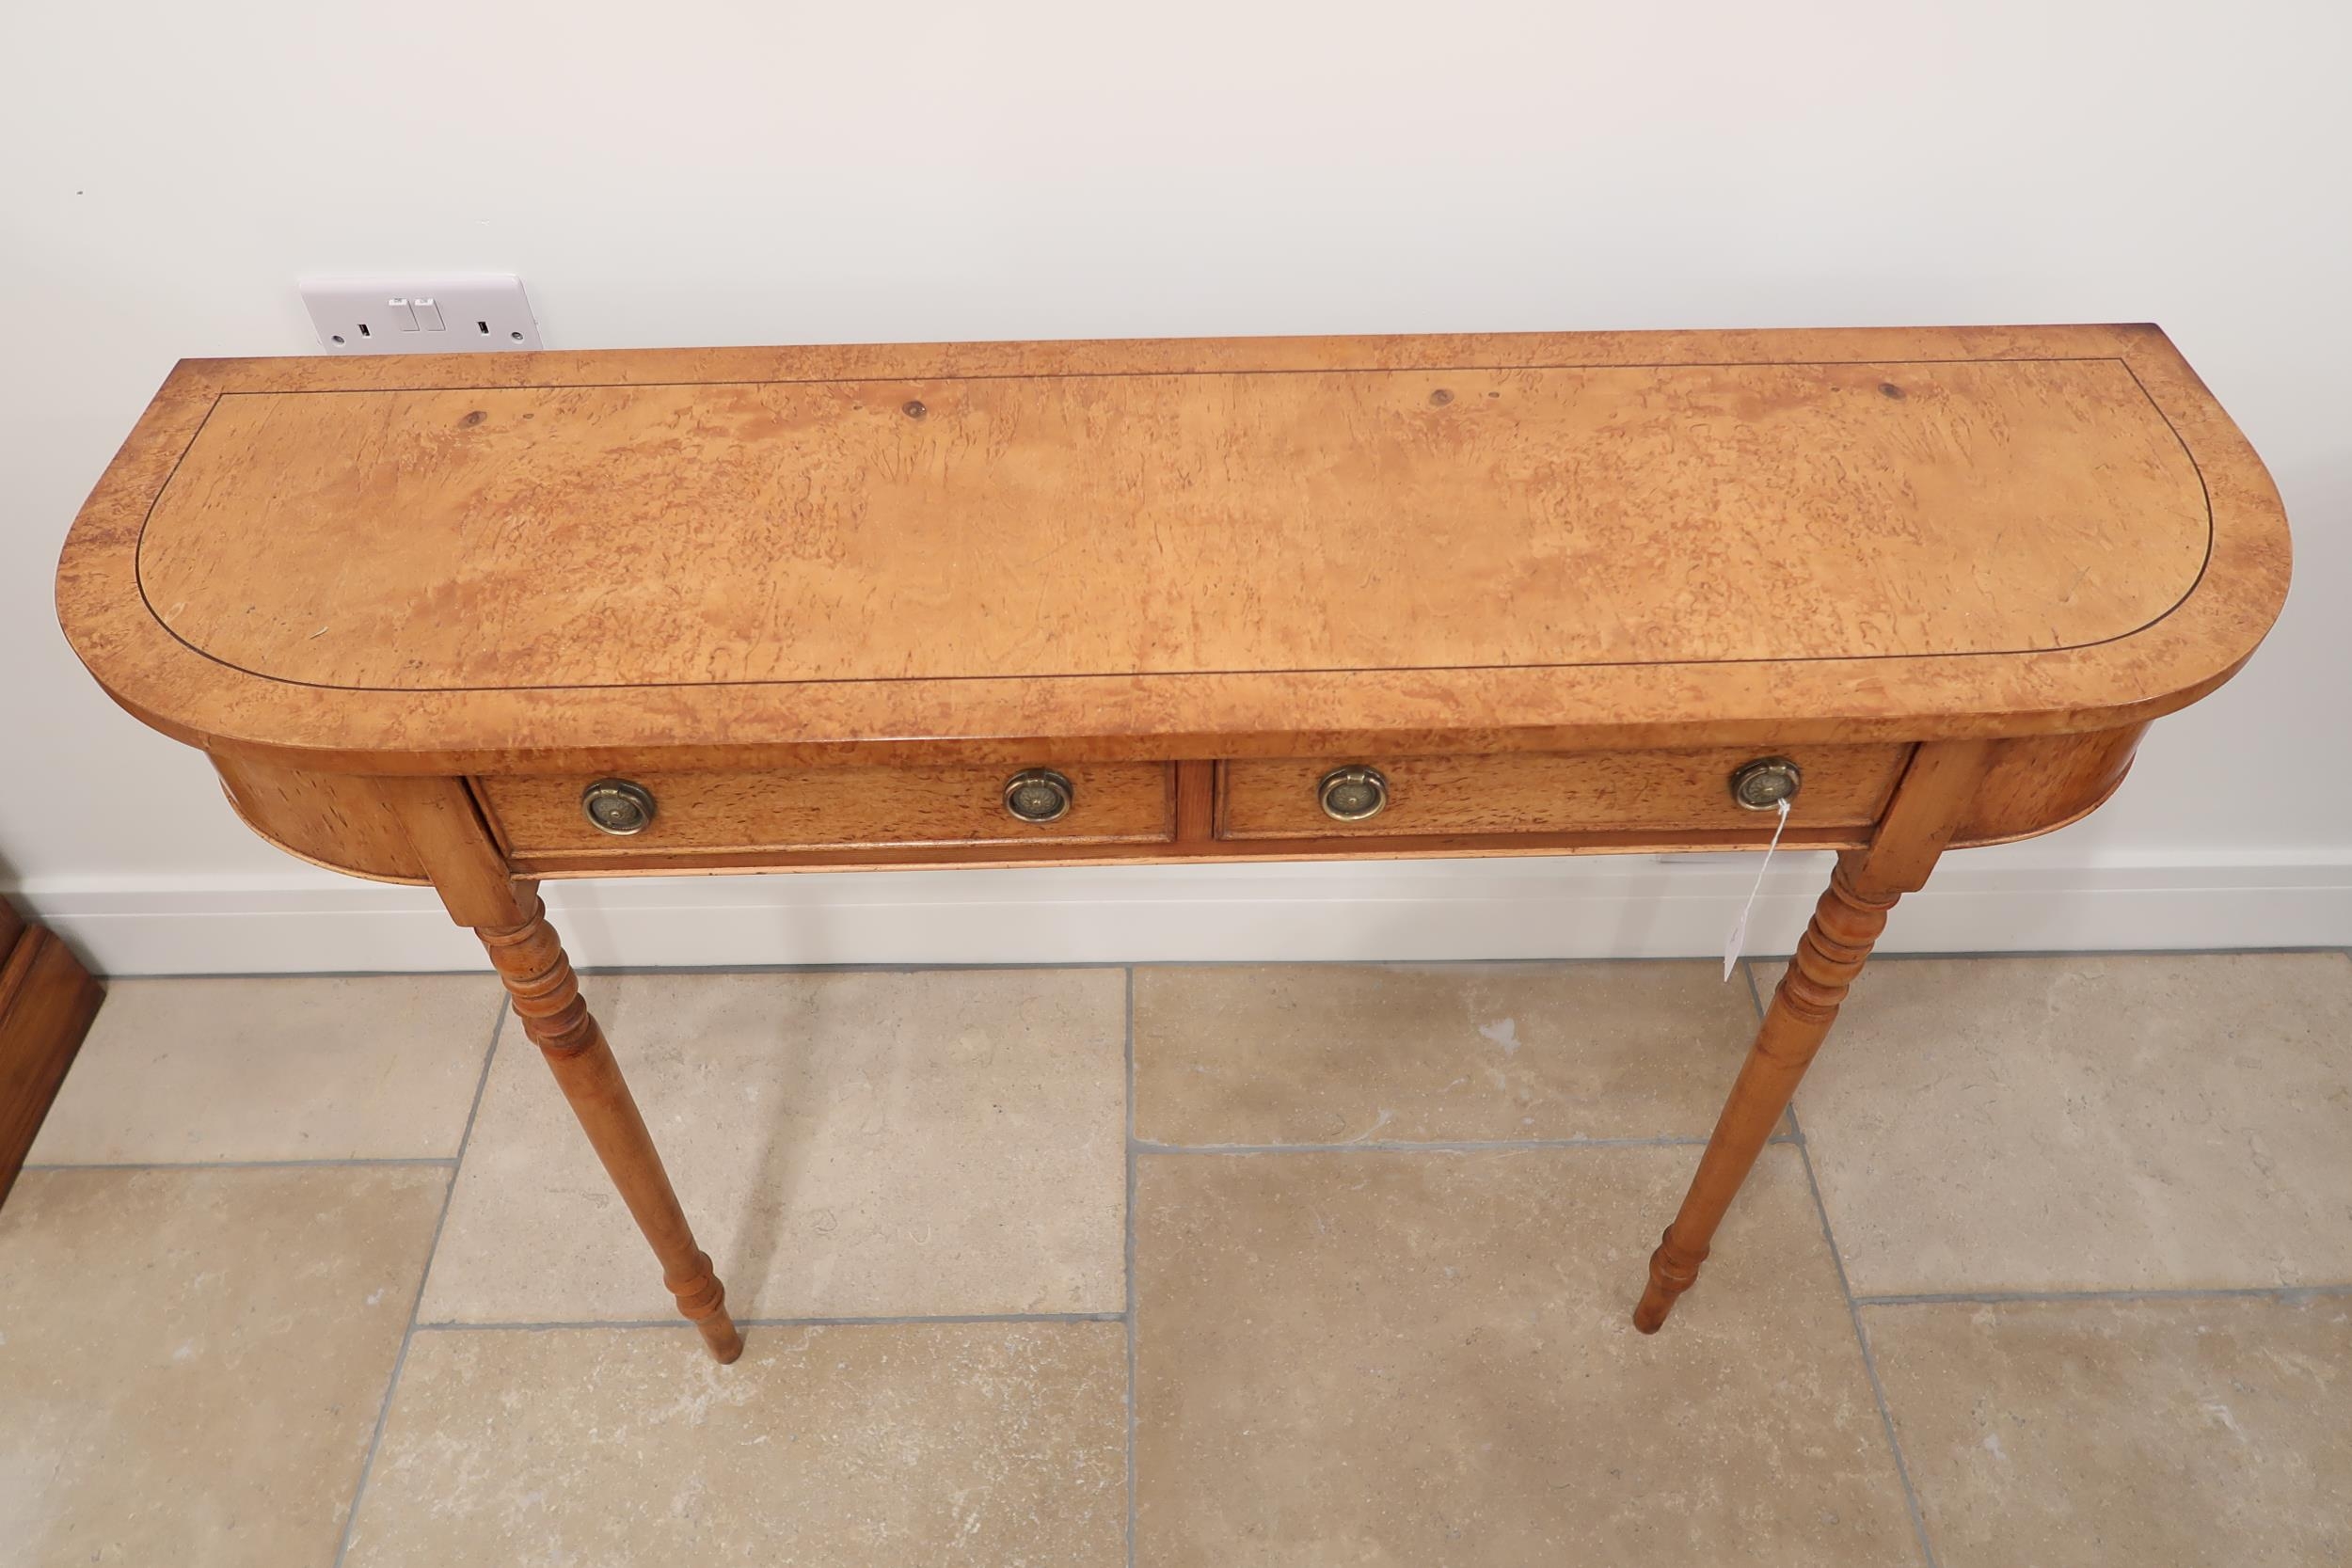 A Birch veneer D end table with two drawers - Width 120cm x Depth 33cm x Height 76cm - made by a - Bild 2 aus 2